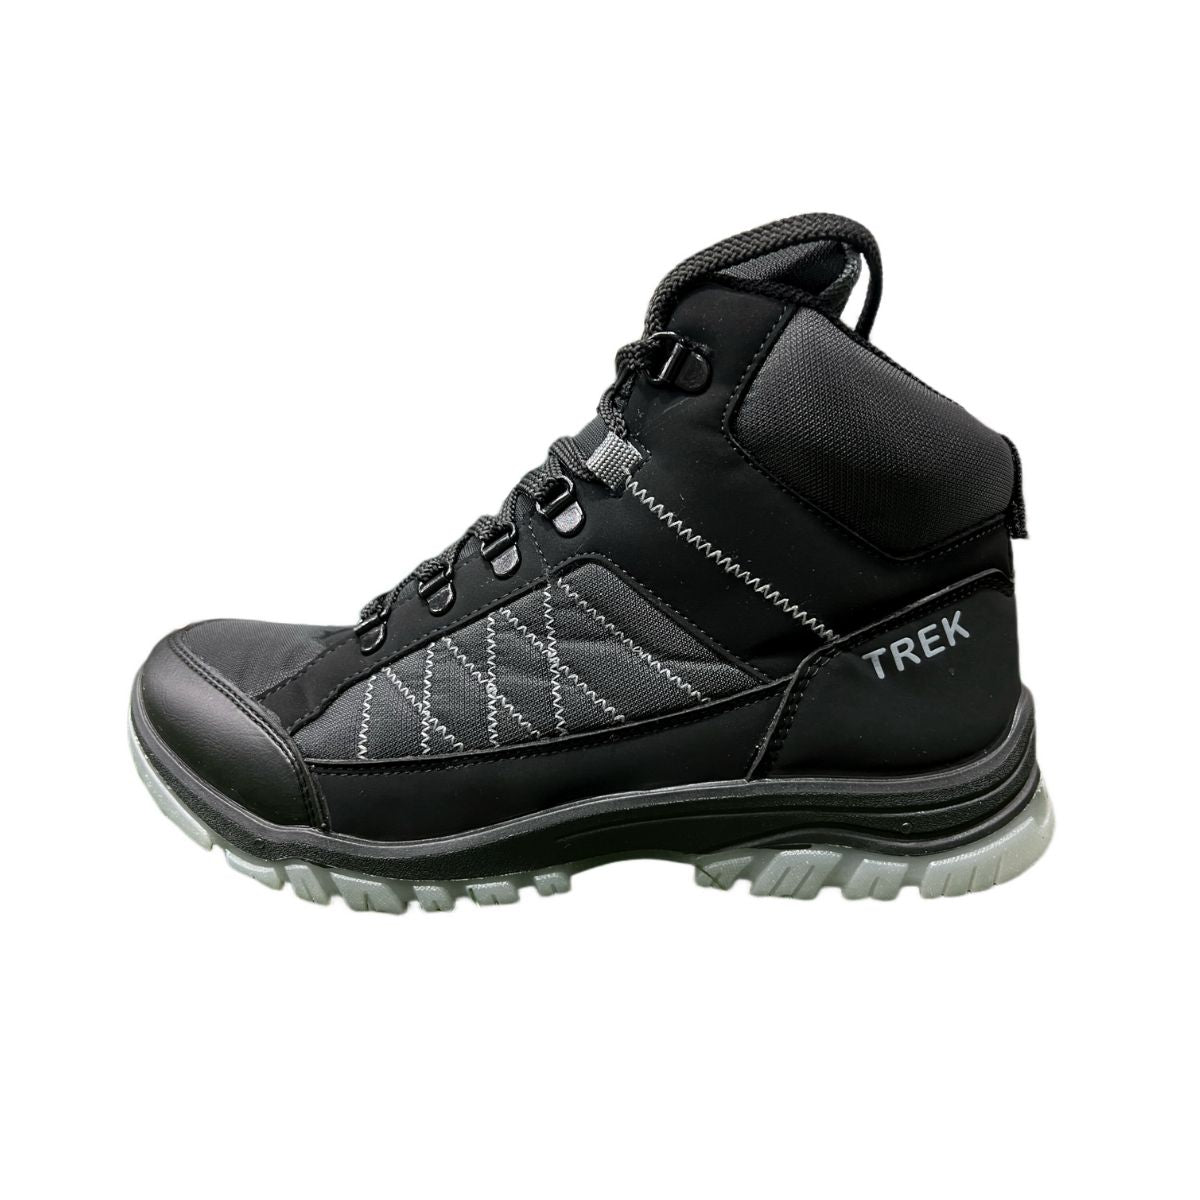 CTR High Ankle Light Weight Trekking and Hiking Shoes - Trek-2 - Black 4